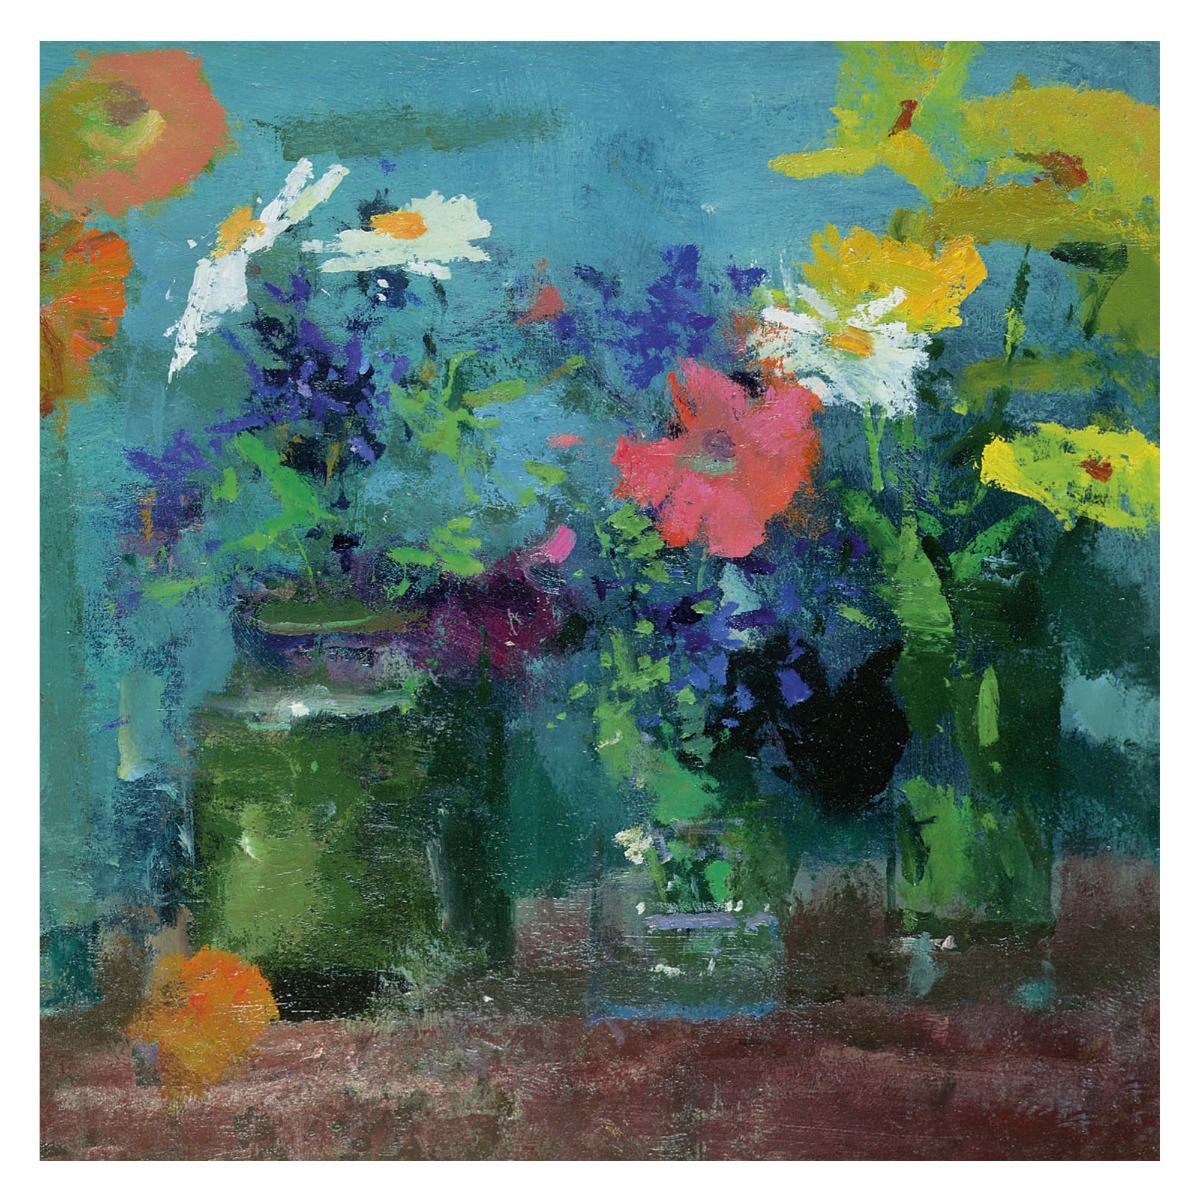 Royal Academy | Fred Cuming - 'Marigolds, Poppies and Daisies' - Art Greetings Card (15 x 15 cm)